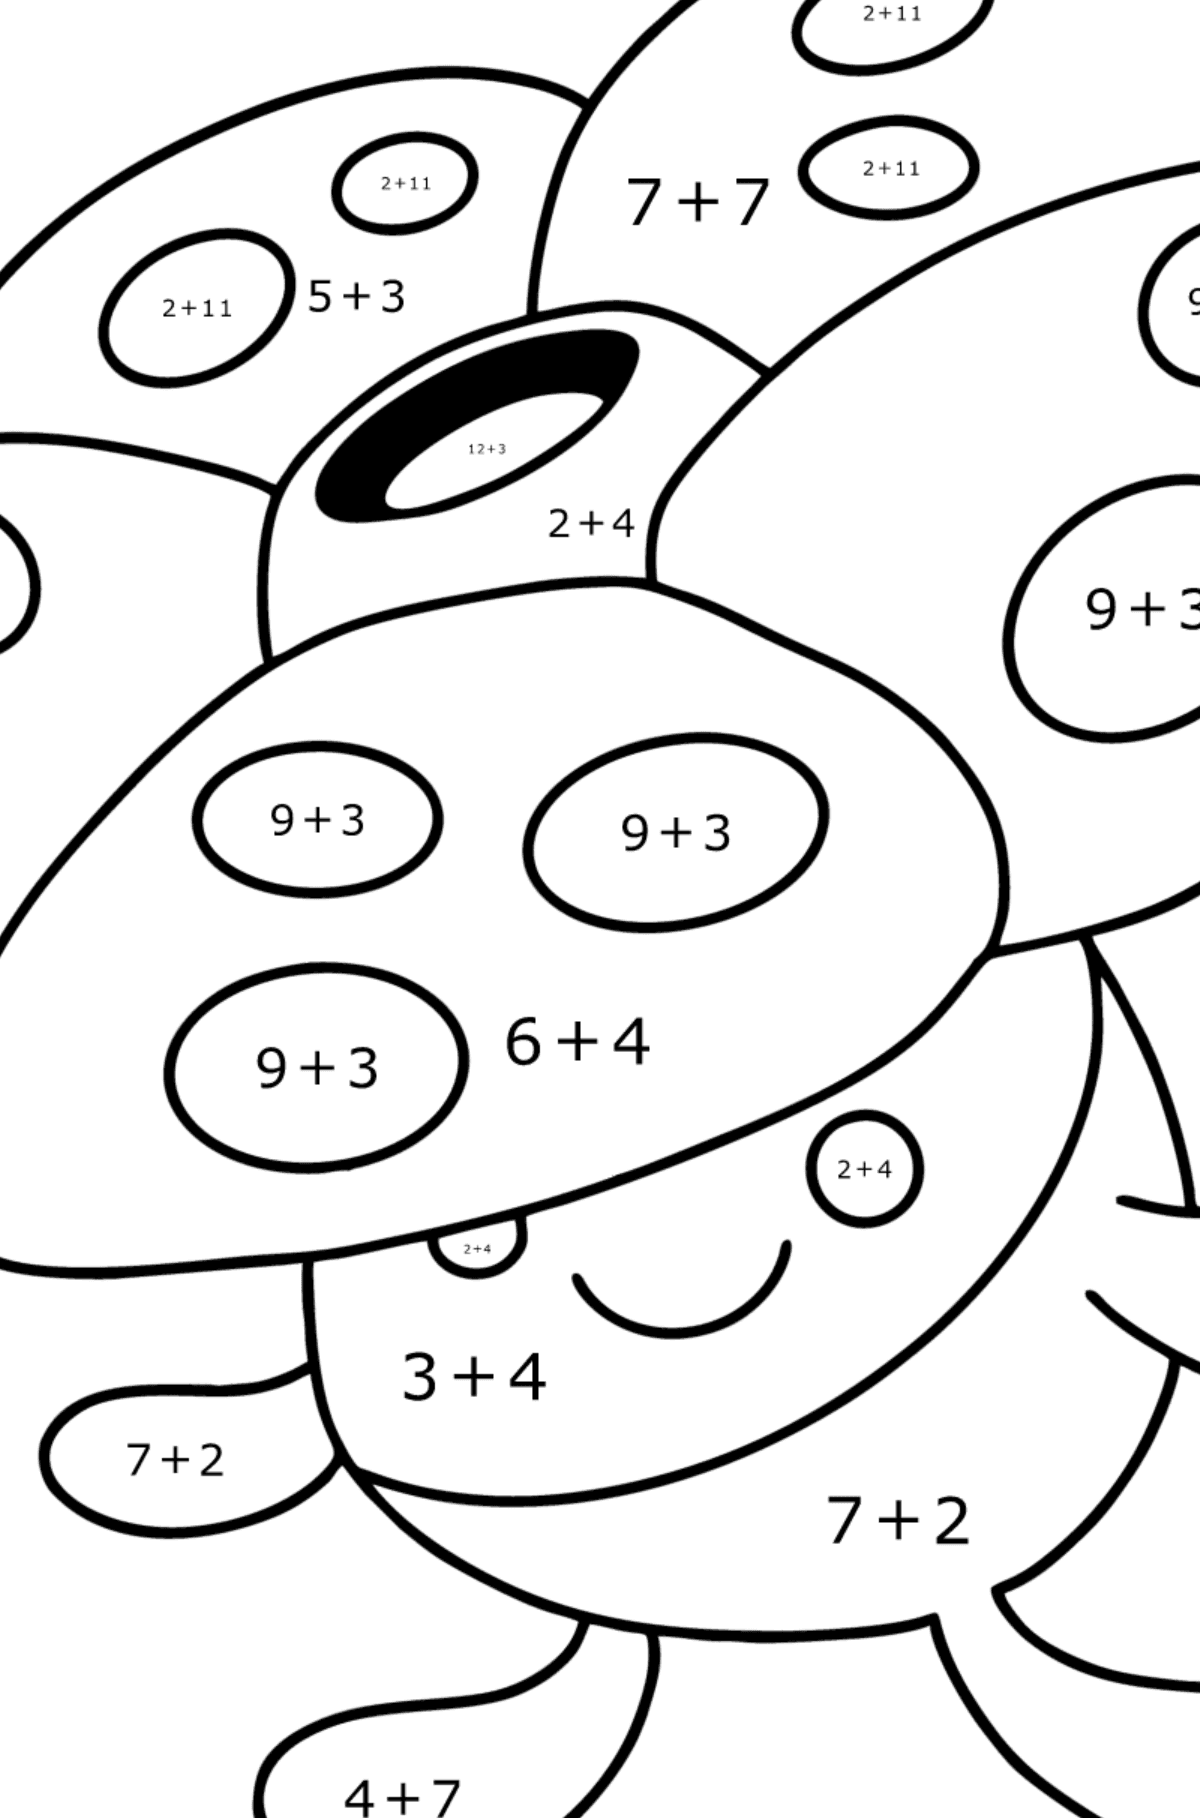 Coloring page Pokémon Go Vileplume - Math Coloring - Addition for Kids